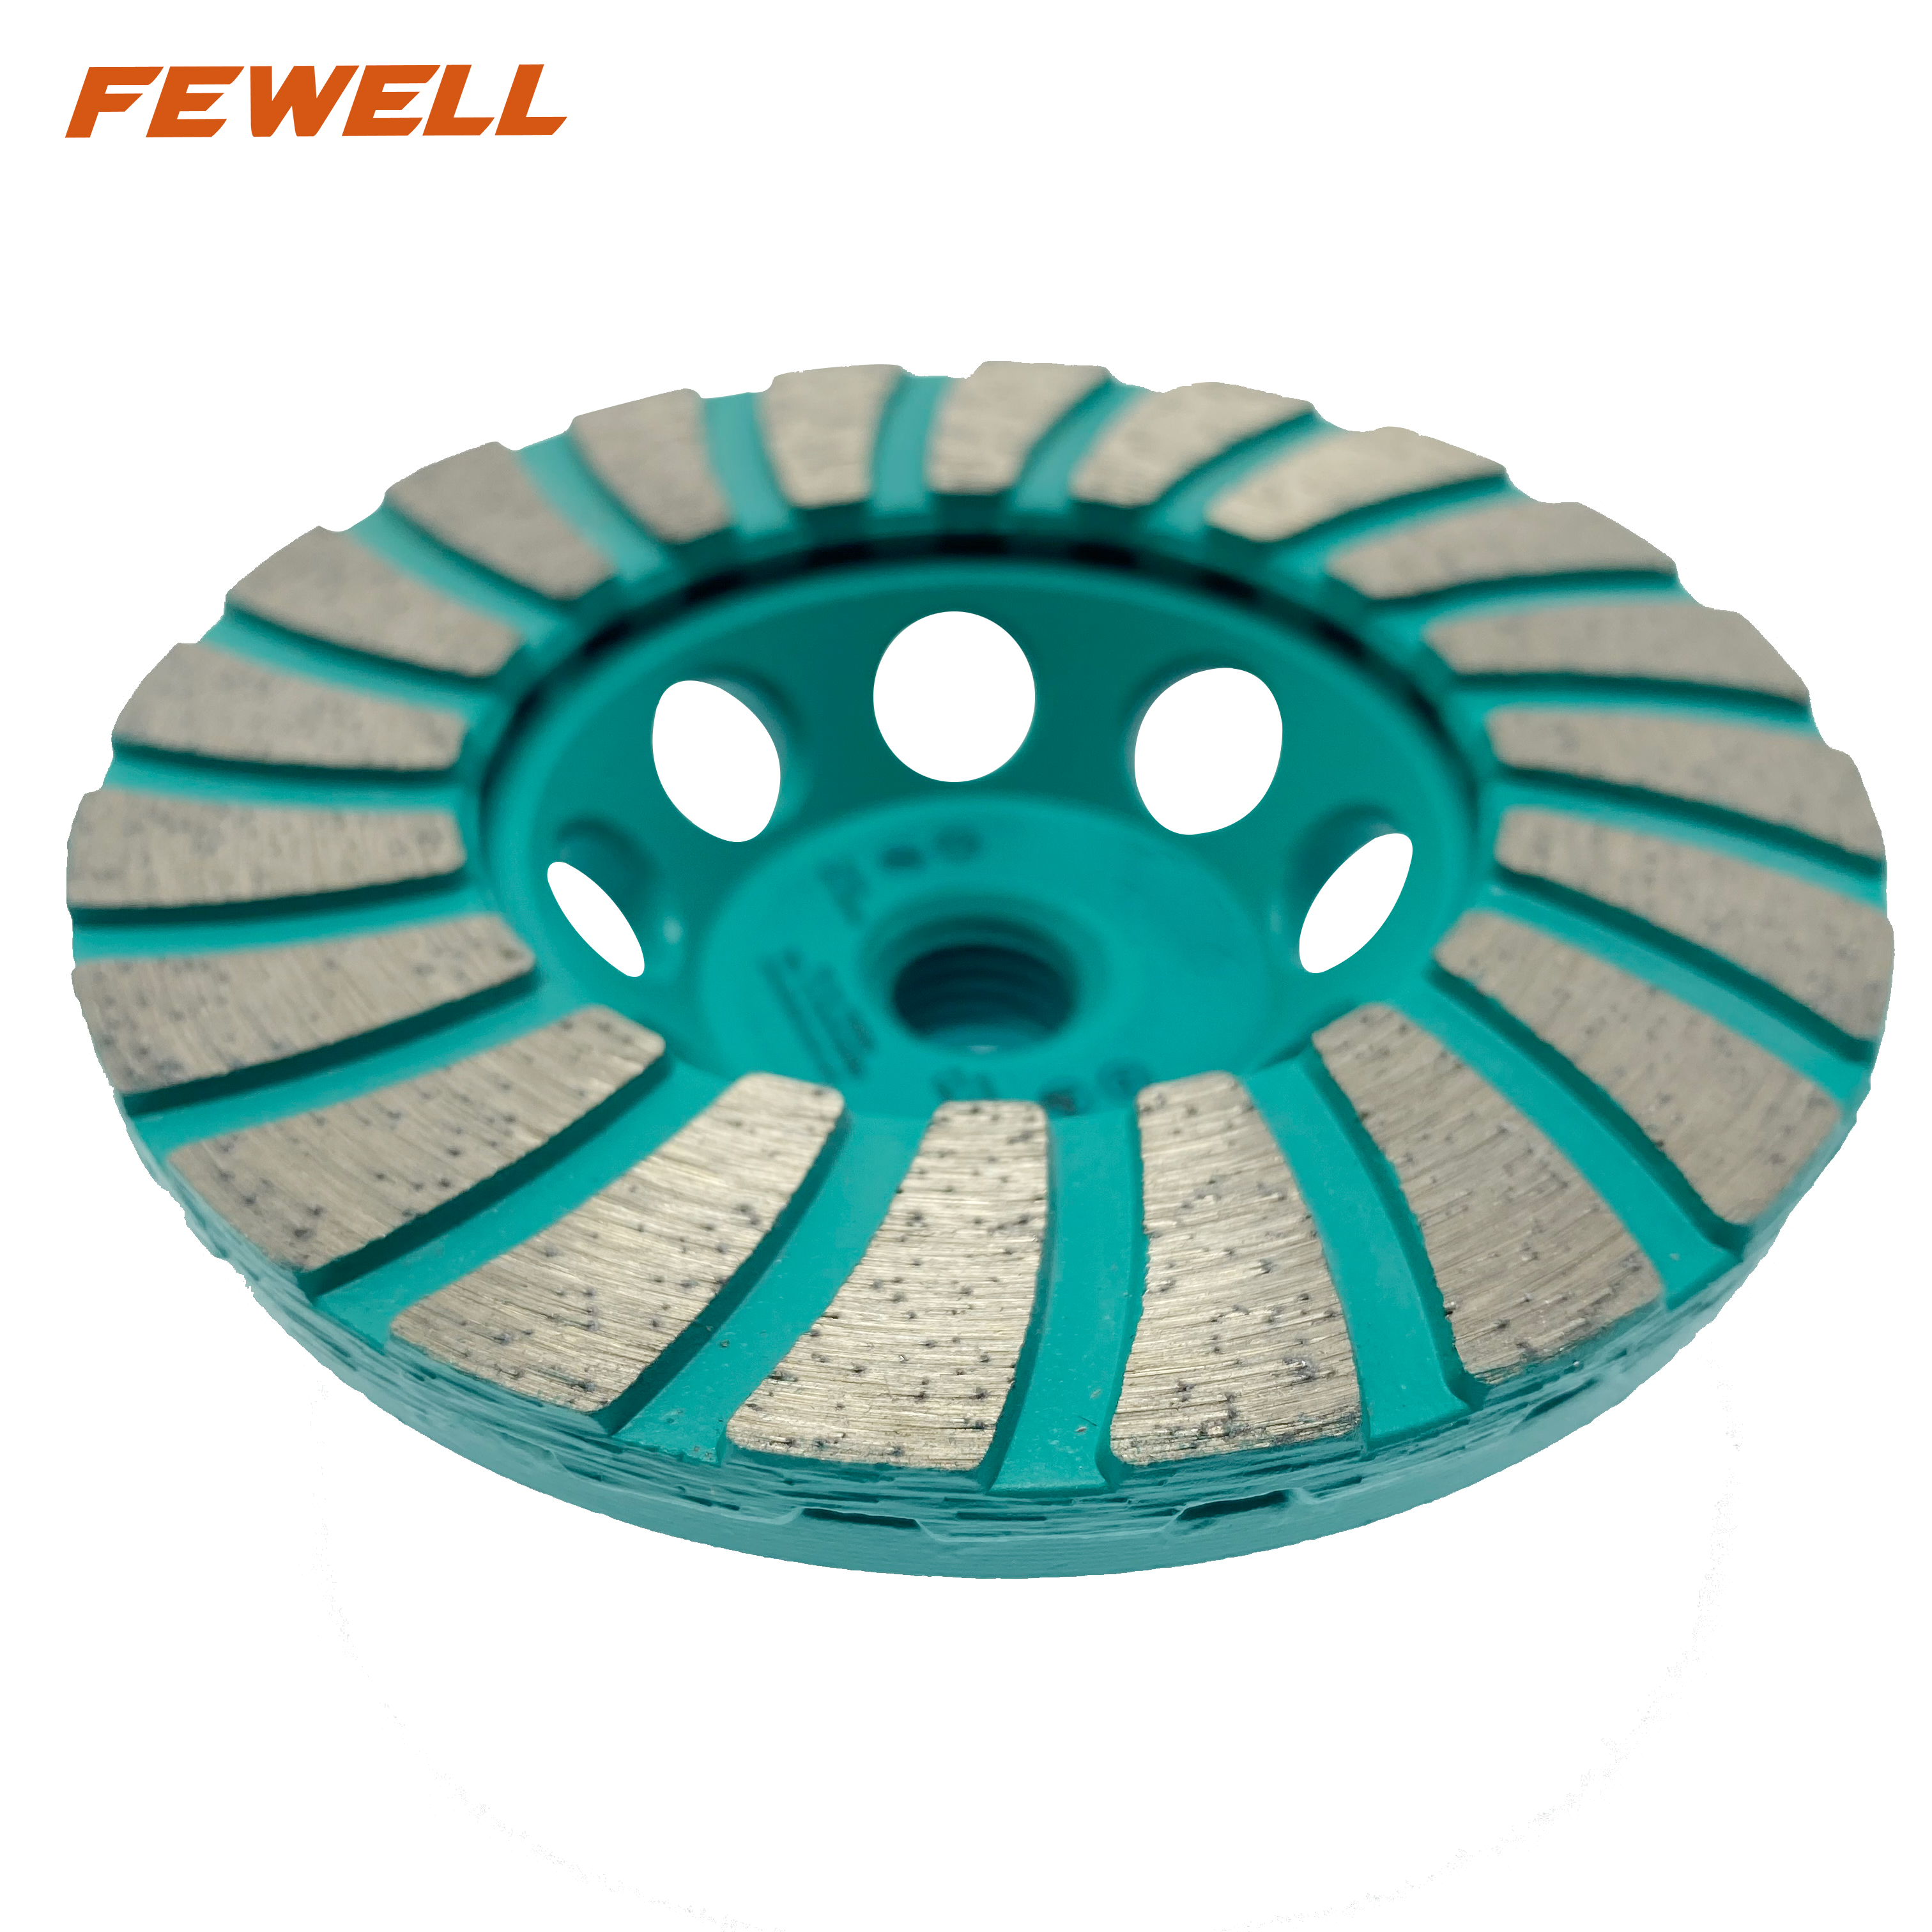 High quality Silver Brazed 4/4.5inch 100/115*5*M14 turbo diamond grinding cup wheel disc for concrete stone